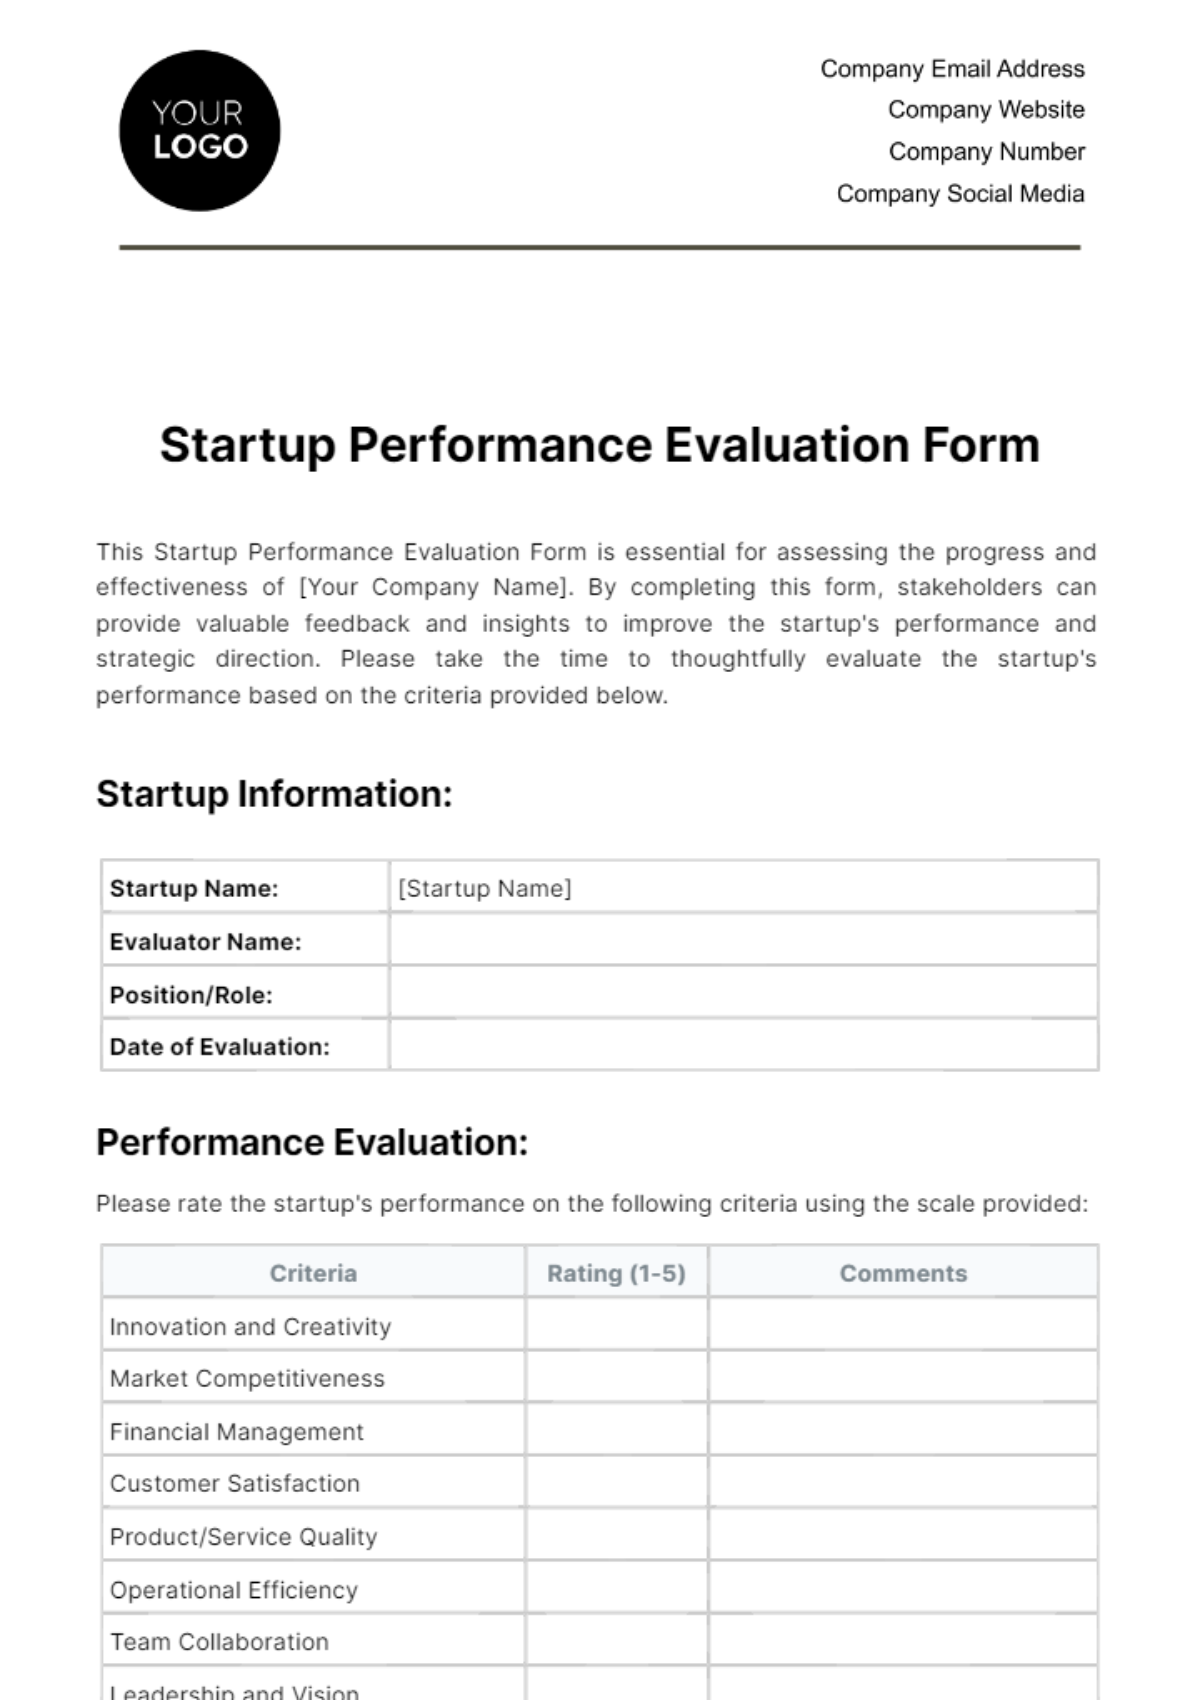 Free Startup Performance Evaluation Form Template